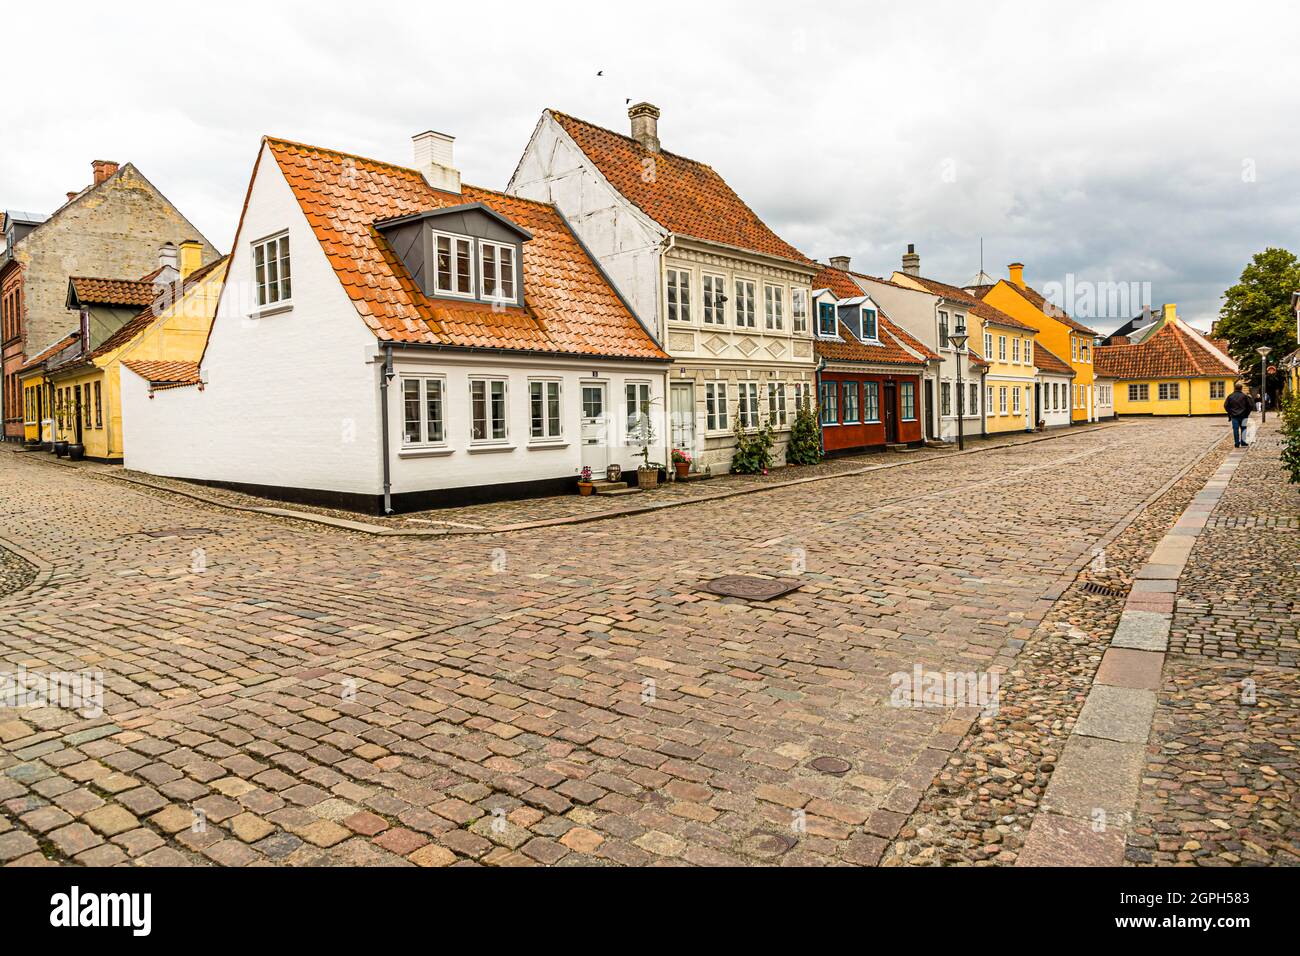 H. C. Andersen residential area in the old town of Odense, Denmark Stock Photo